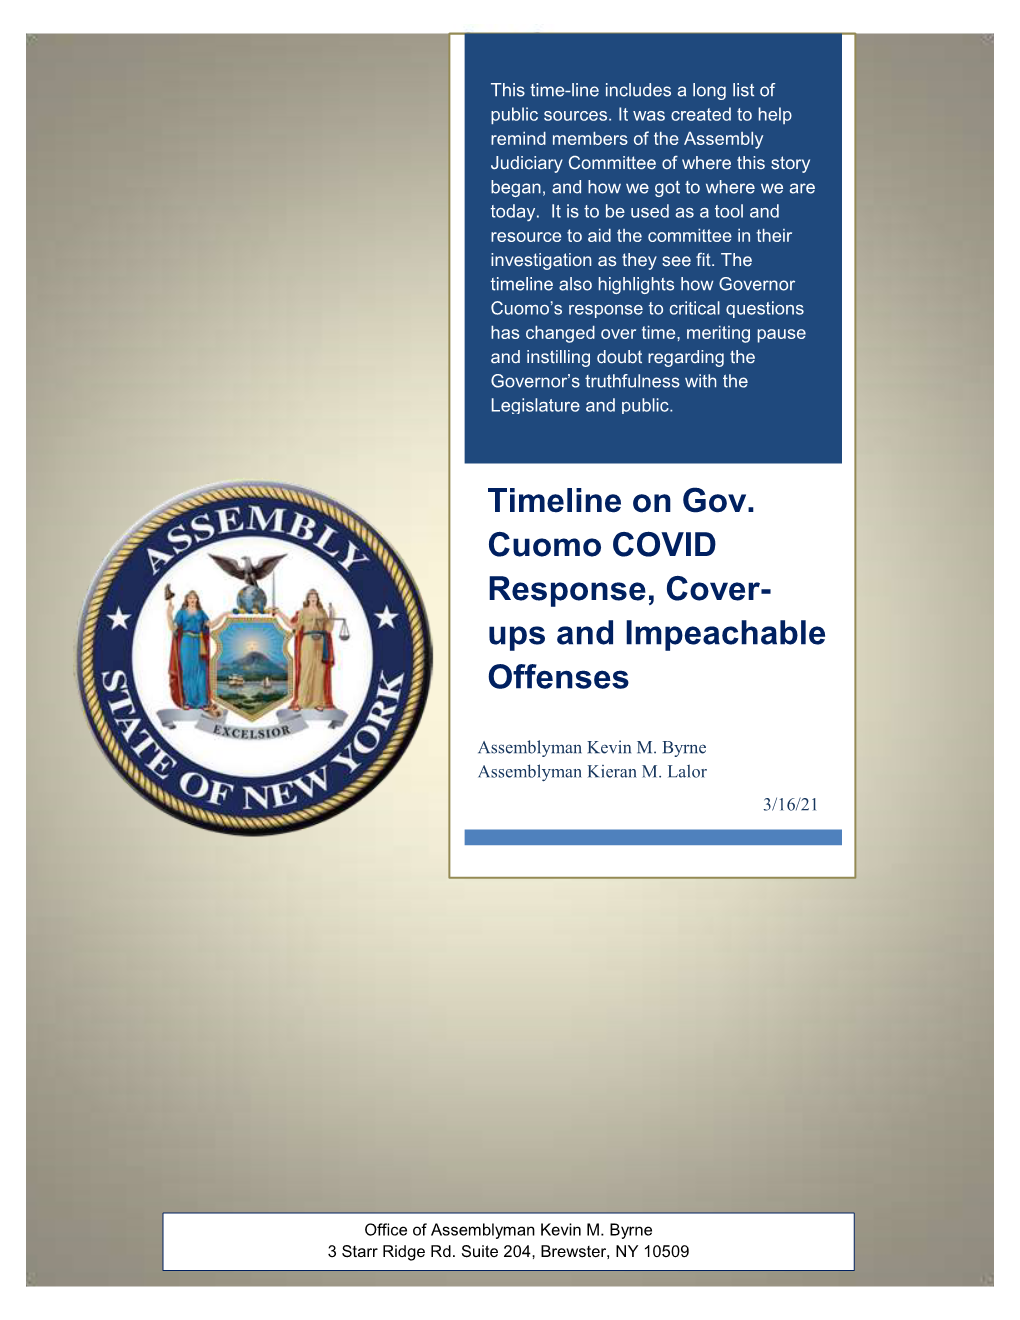 Timeline on Gov. Cuomo COVID Response, Cover- Ups and Impeachable Offenses